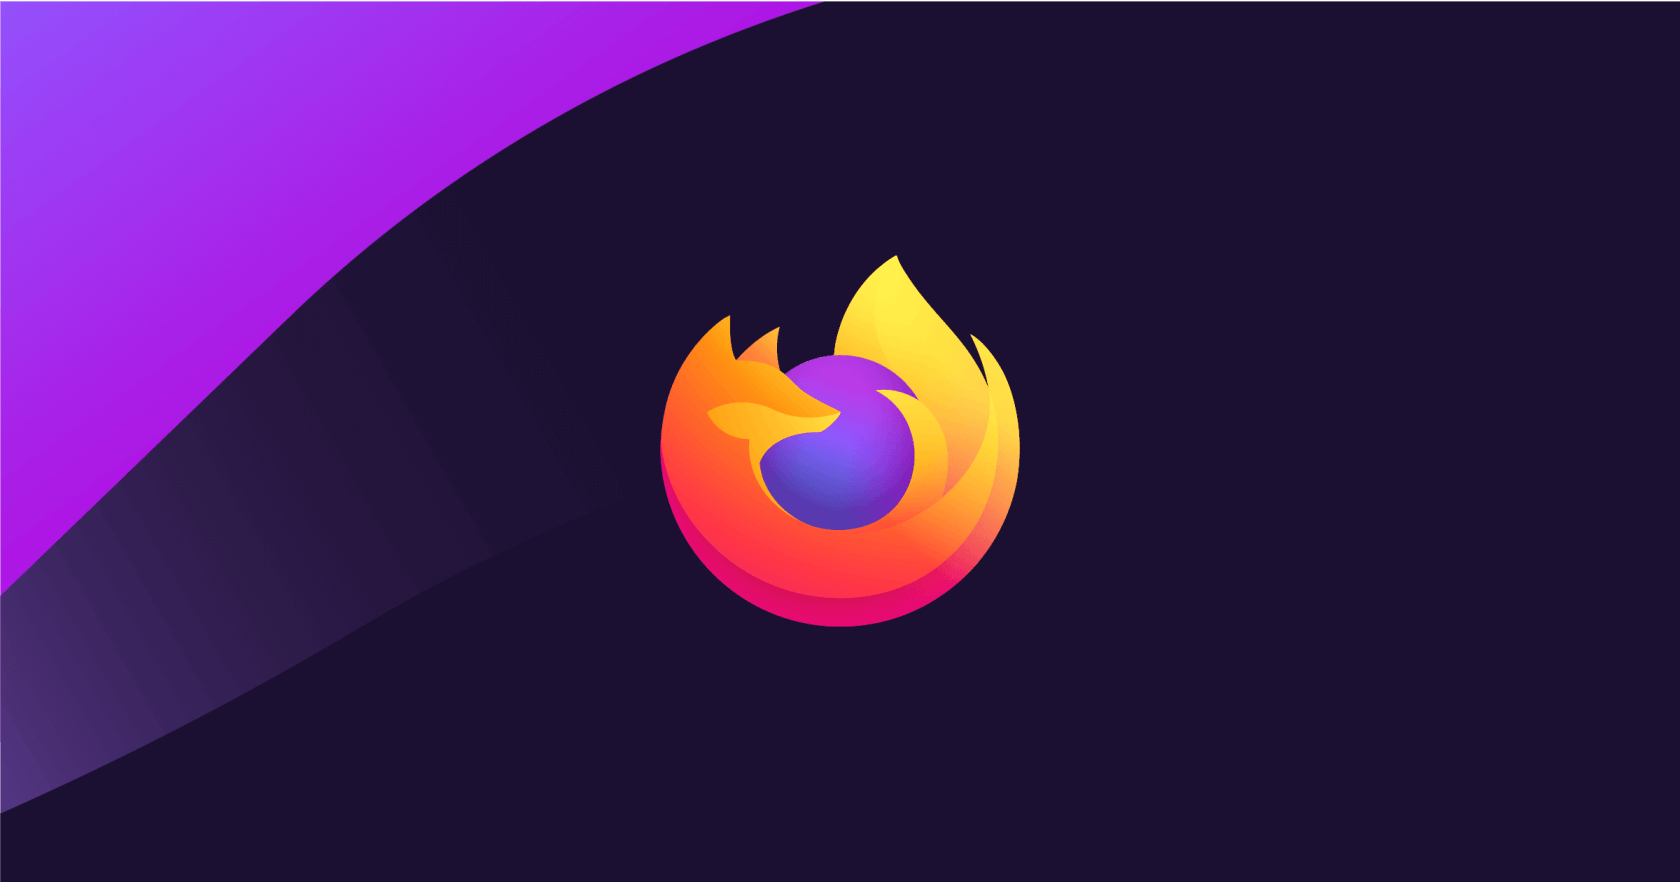 Mozilla begins rolling out DNS encryption by default for Firefox users